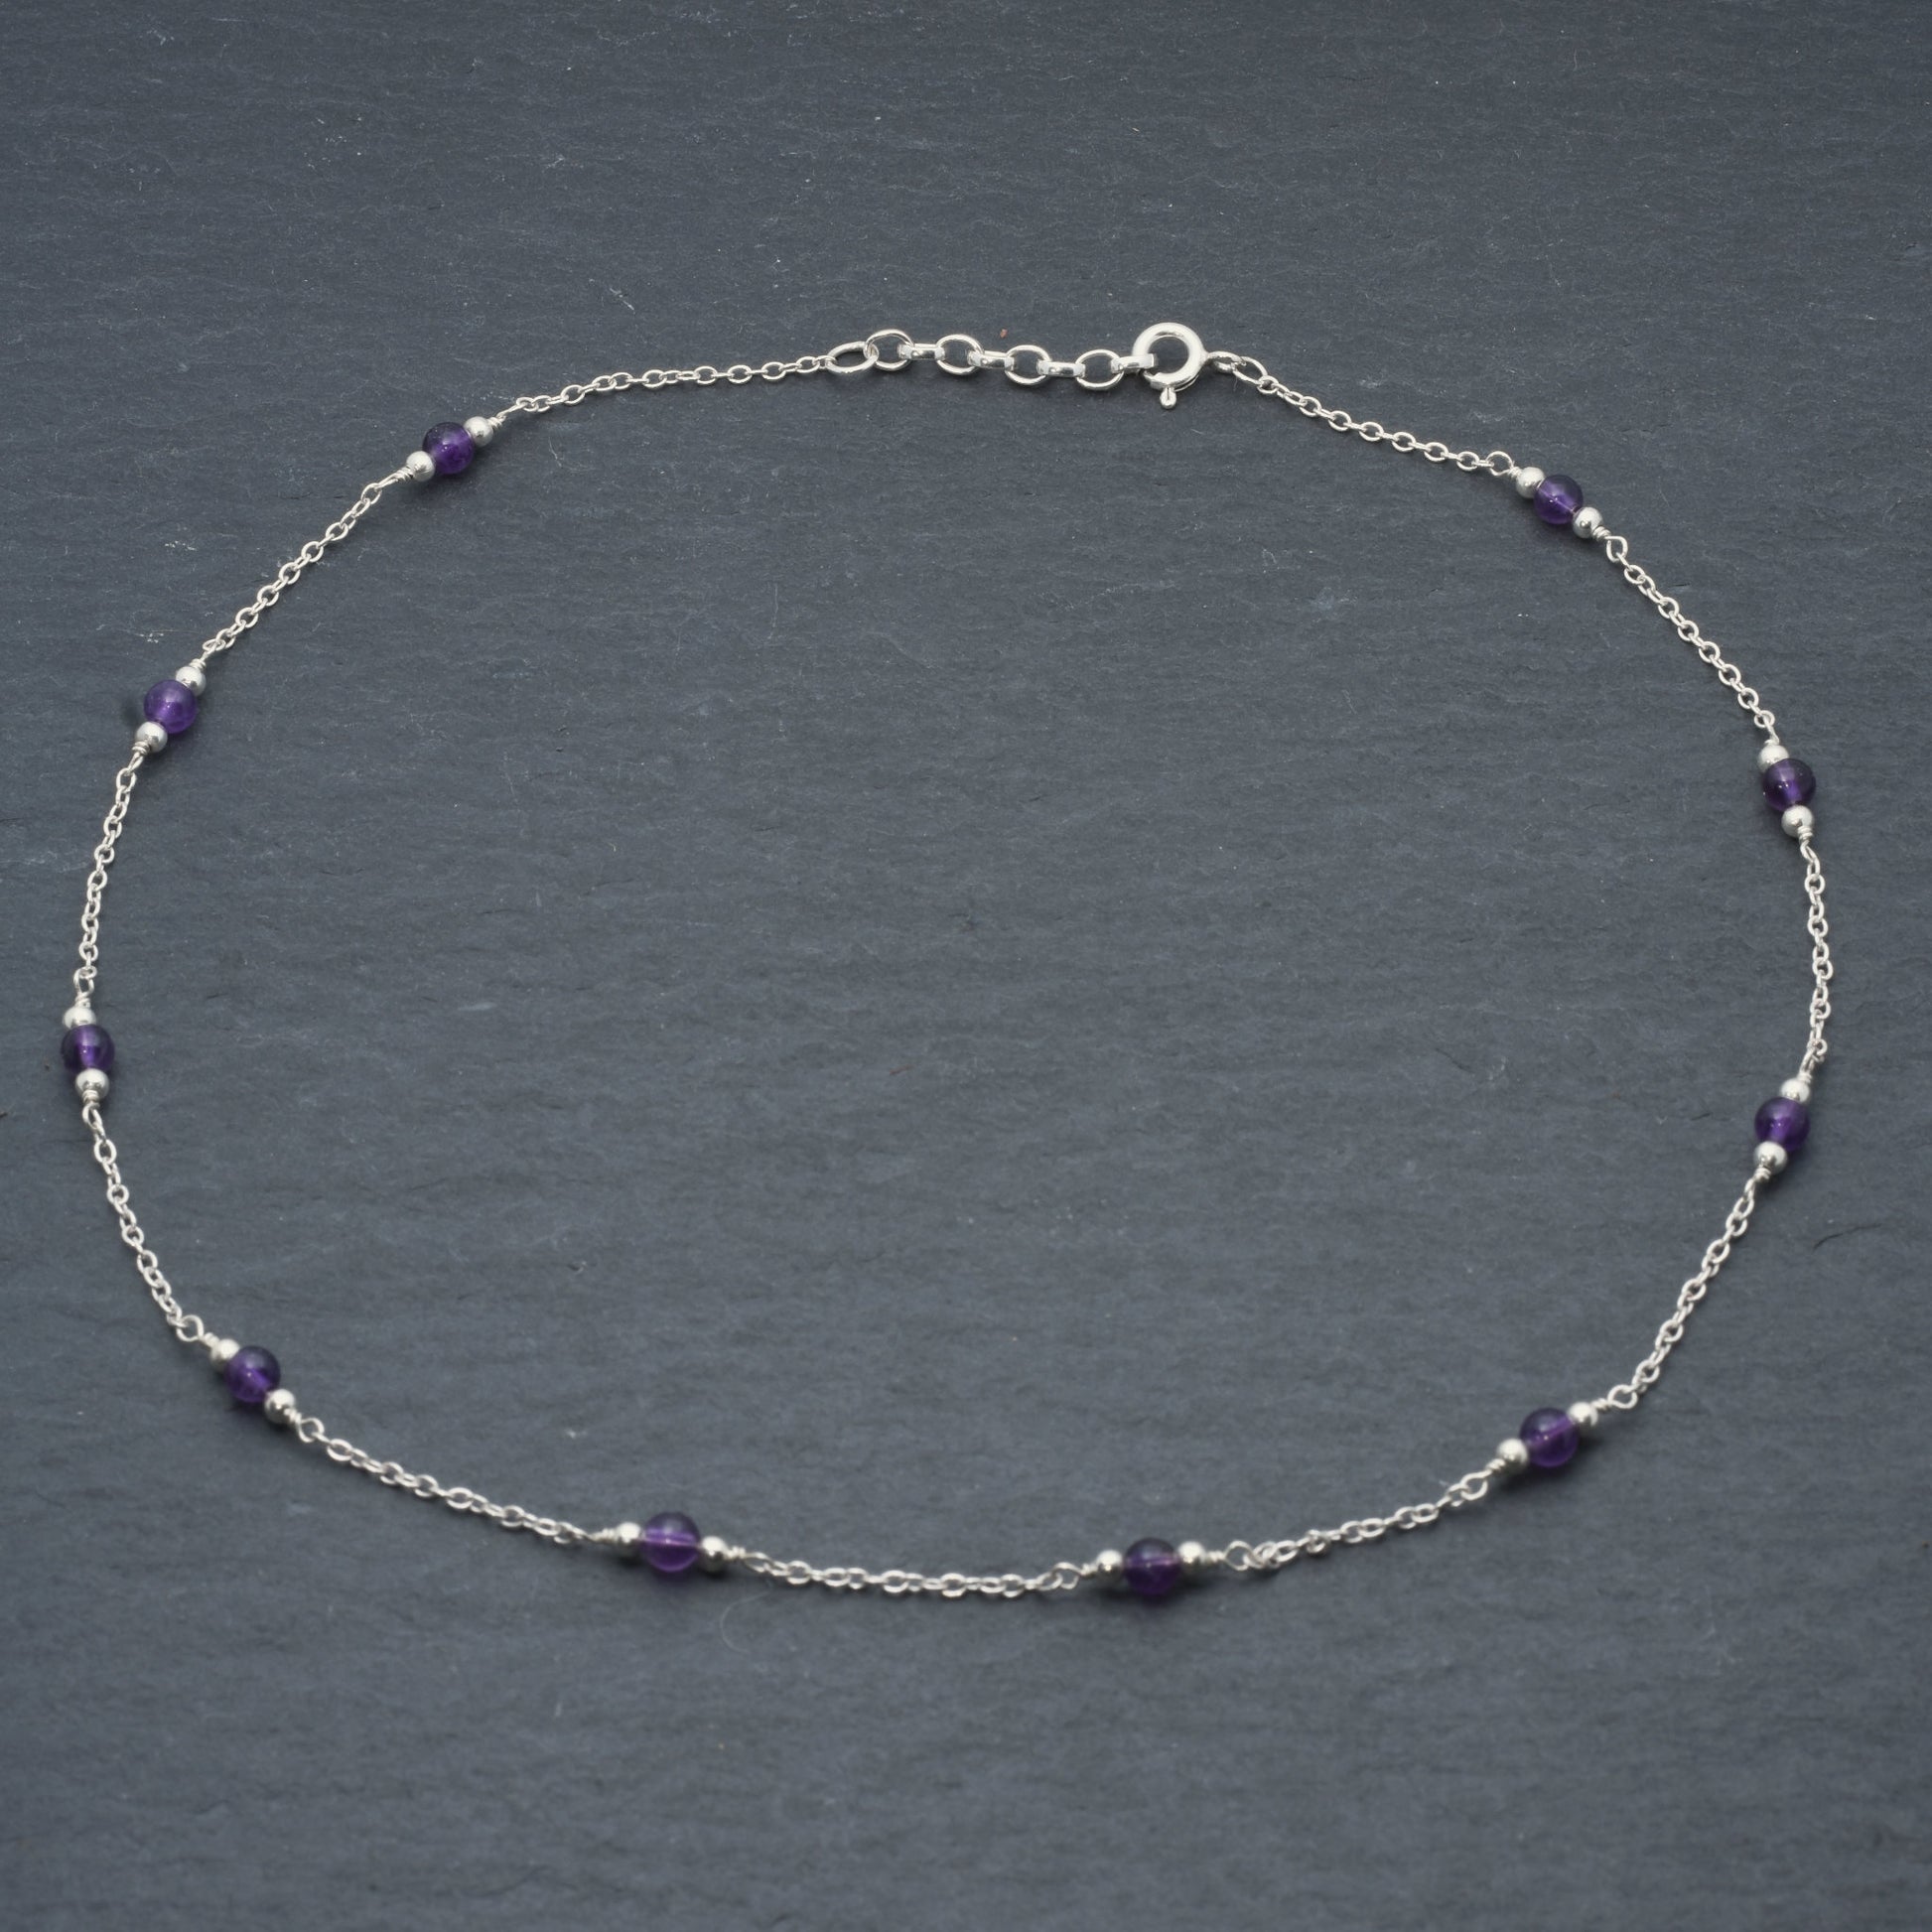 Amethyst bead chain necklace on slate background